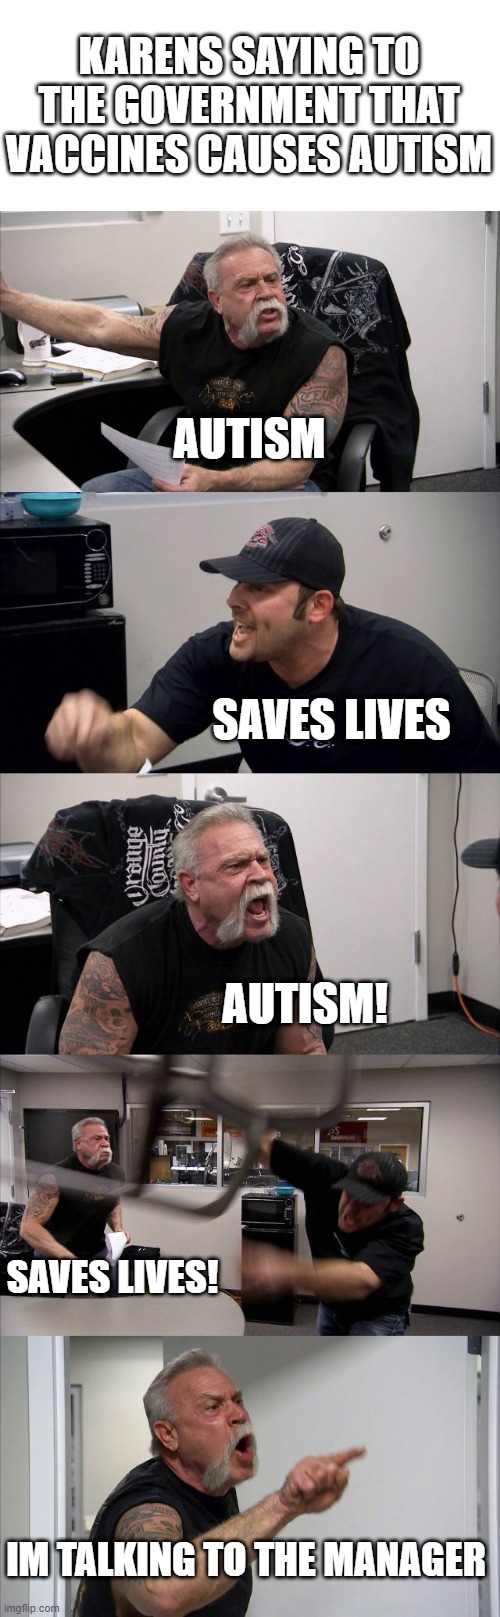 karens take the hint VACCINES DONT CAUSE AUTISM | KARENS SAYING TO THE GOVERNMENT THAT VACCINES CAUSES AUTISM; AUTISM; SAVES LIVES; AUTISM! SAVES LIVES! IM TALKING TO THE MANAGER | image tagged in memes,american chopper argument | made w/ Imgflip meme maker